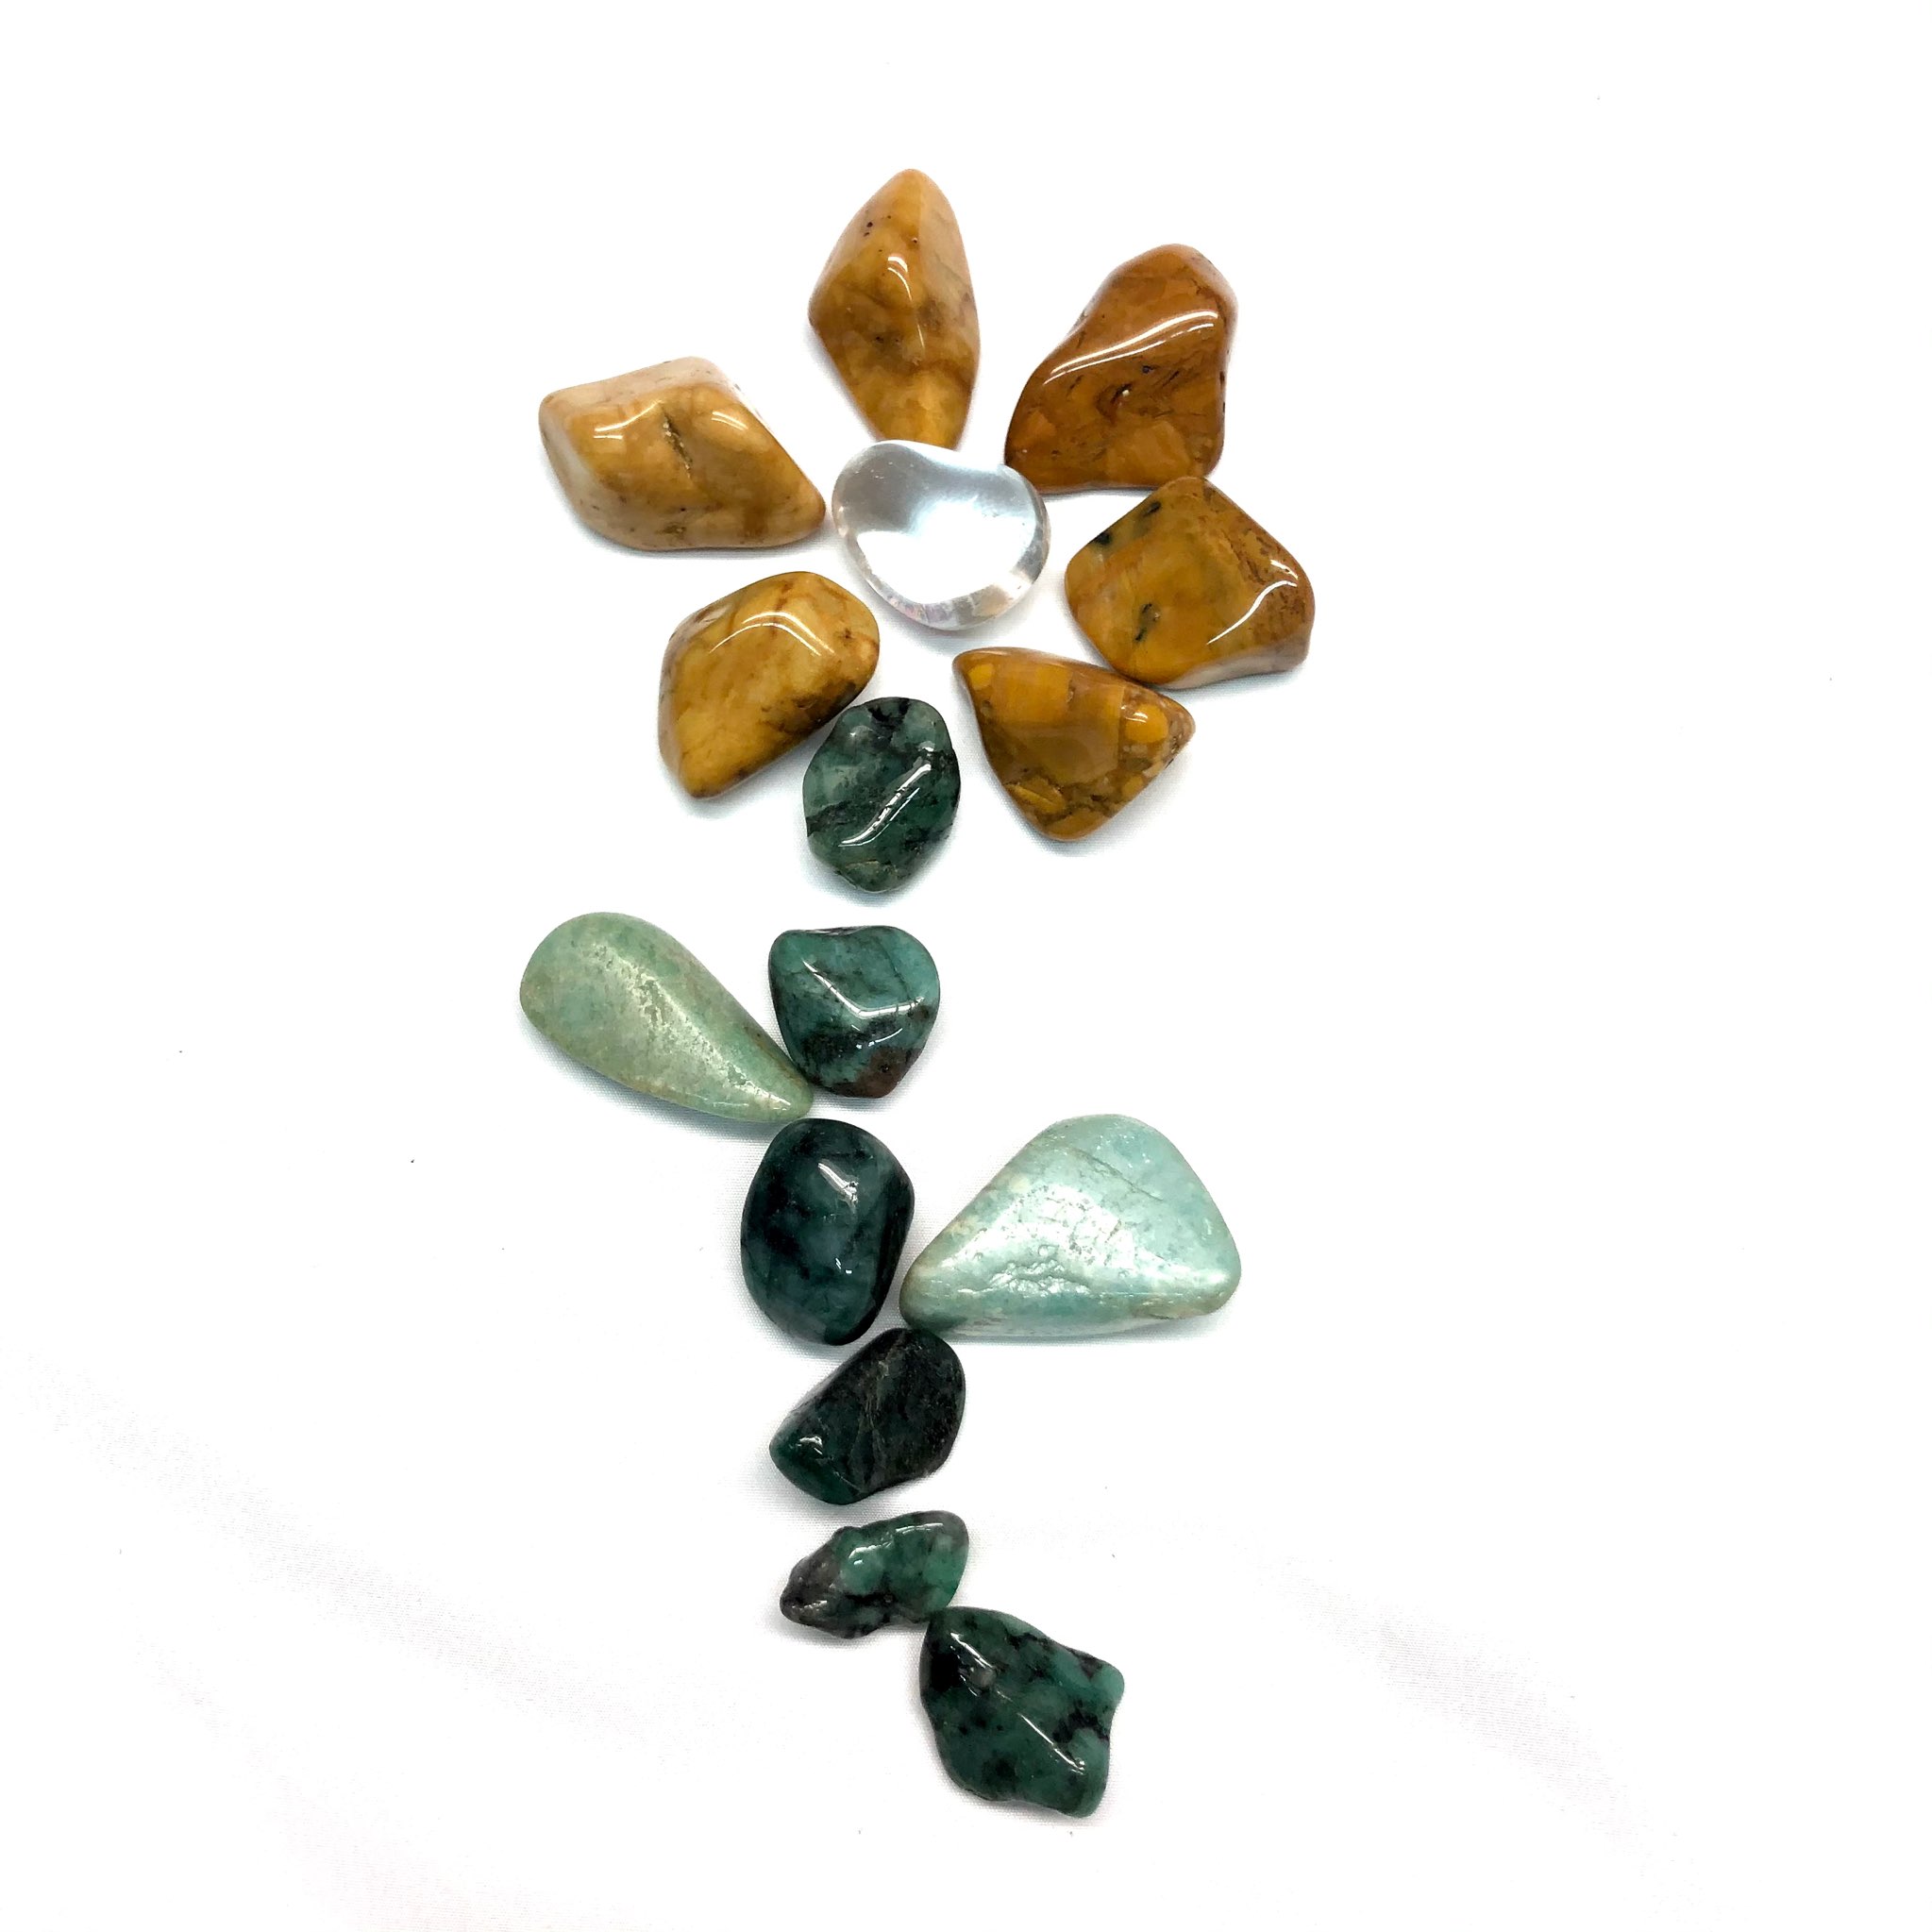 Crystal Flower made with Yellow Jasper, Clear Quartz and Emerald